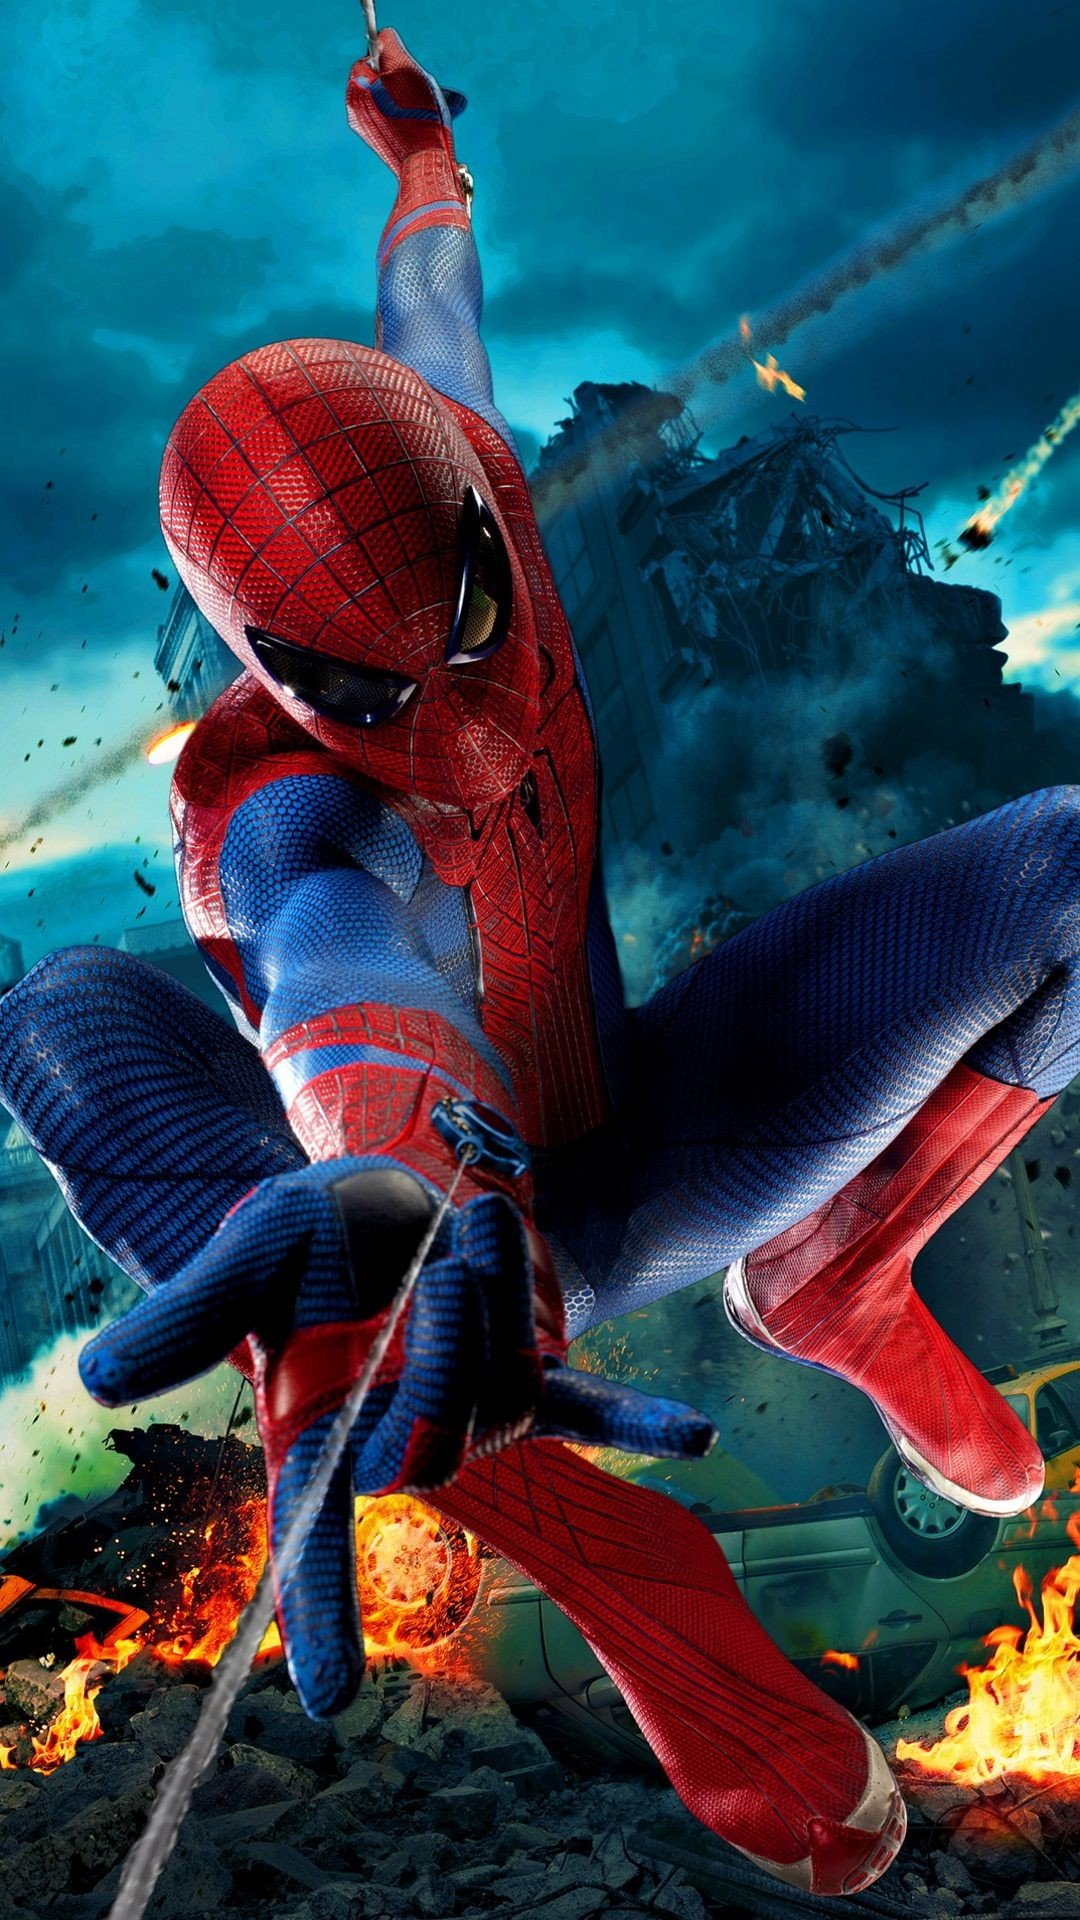 Free Download Spider Man Homecoming Wallpaper IPhone 6 6s 7 By Spideylife [1080x1920] For Your Desktop, Mobile & Tablet. Explore Spider Man Homecoming Wallpaper Costume. Spider Man Homecoming Wallpaper Costume, Spider Man